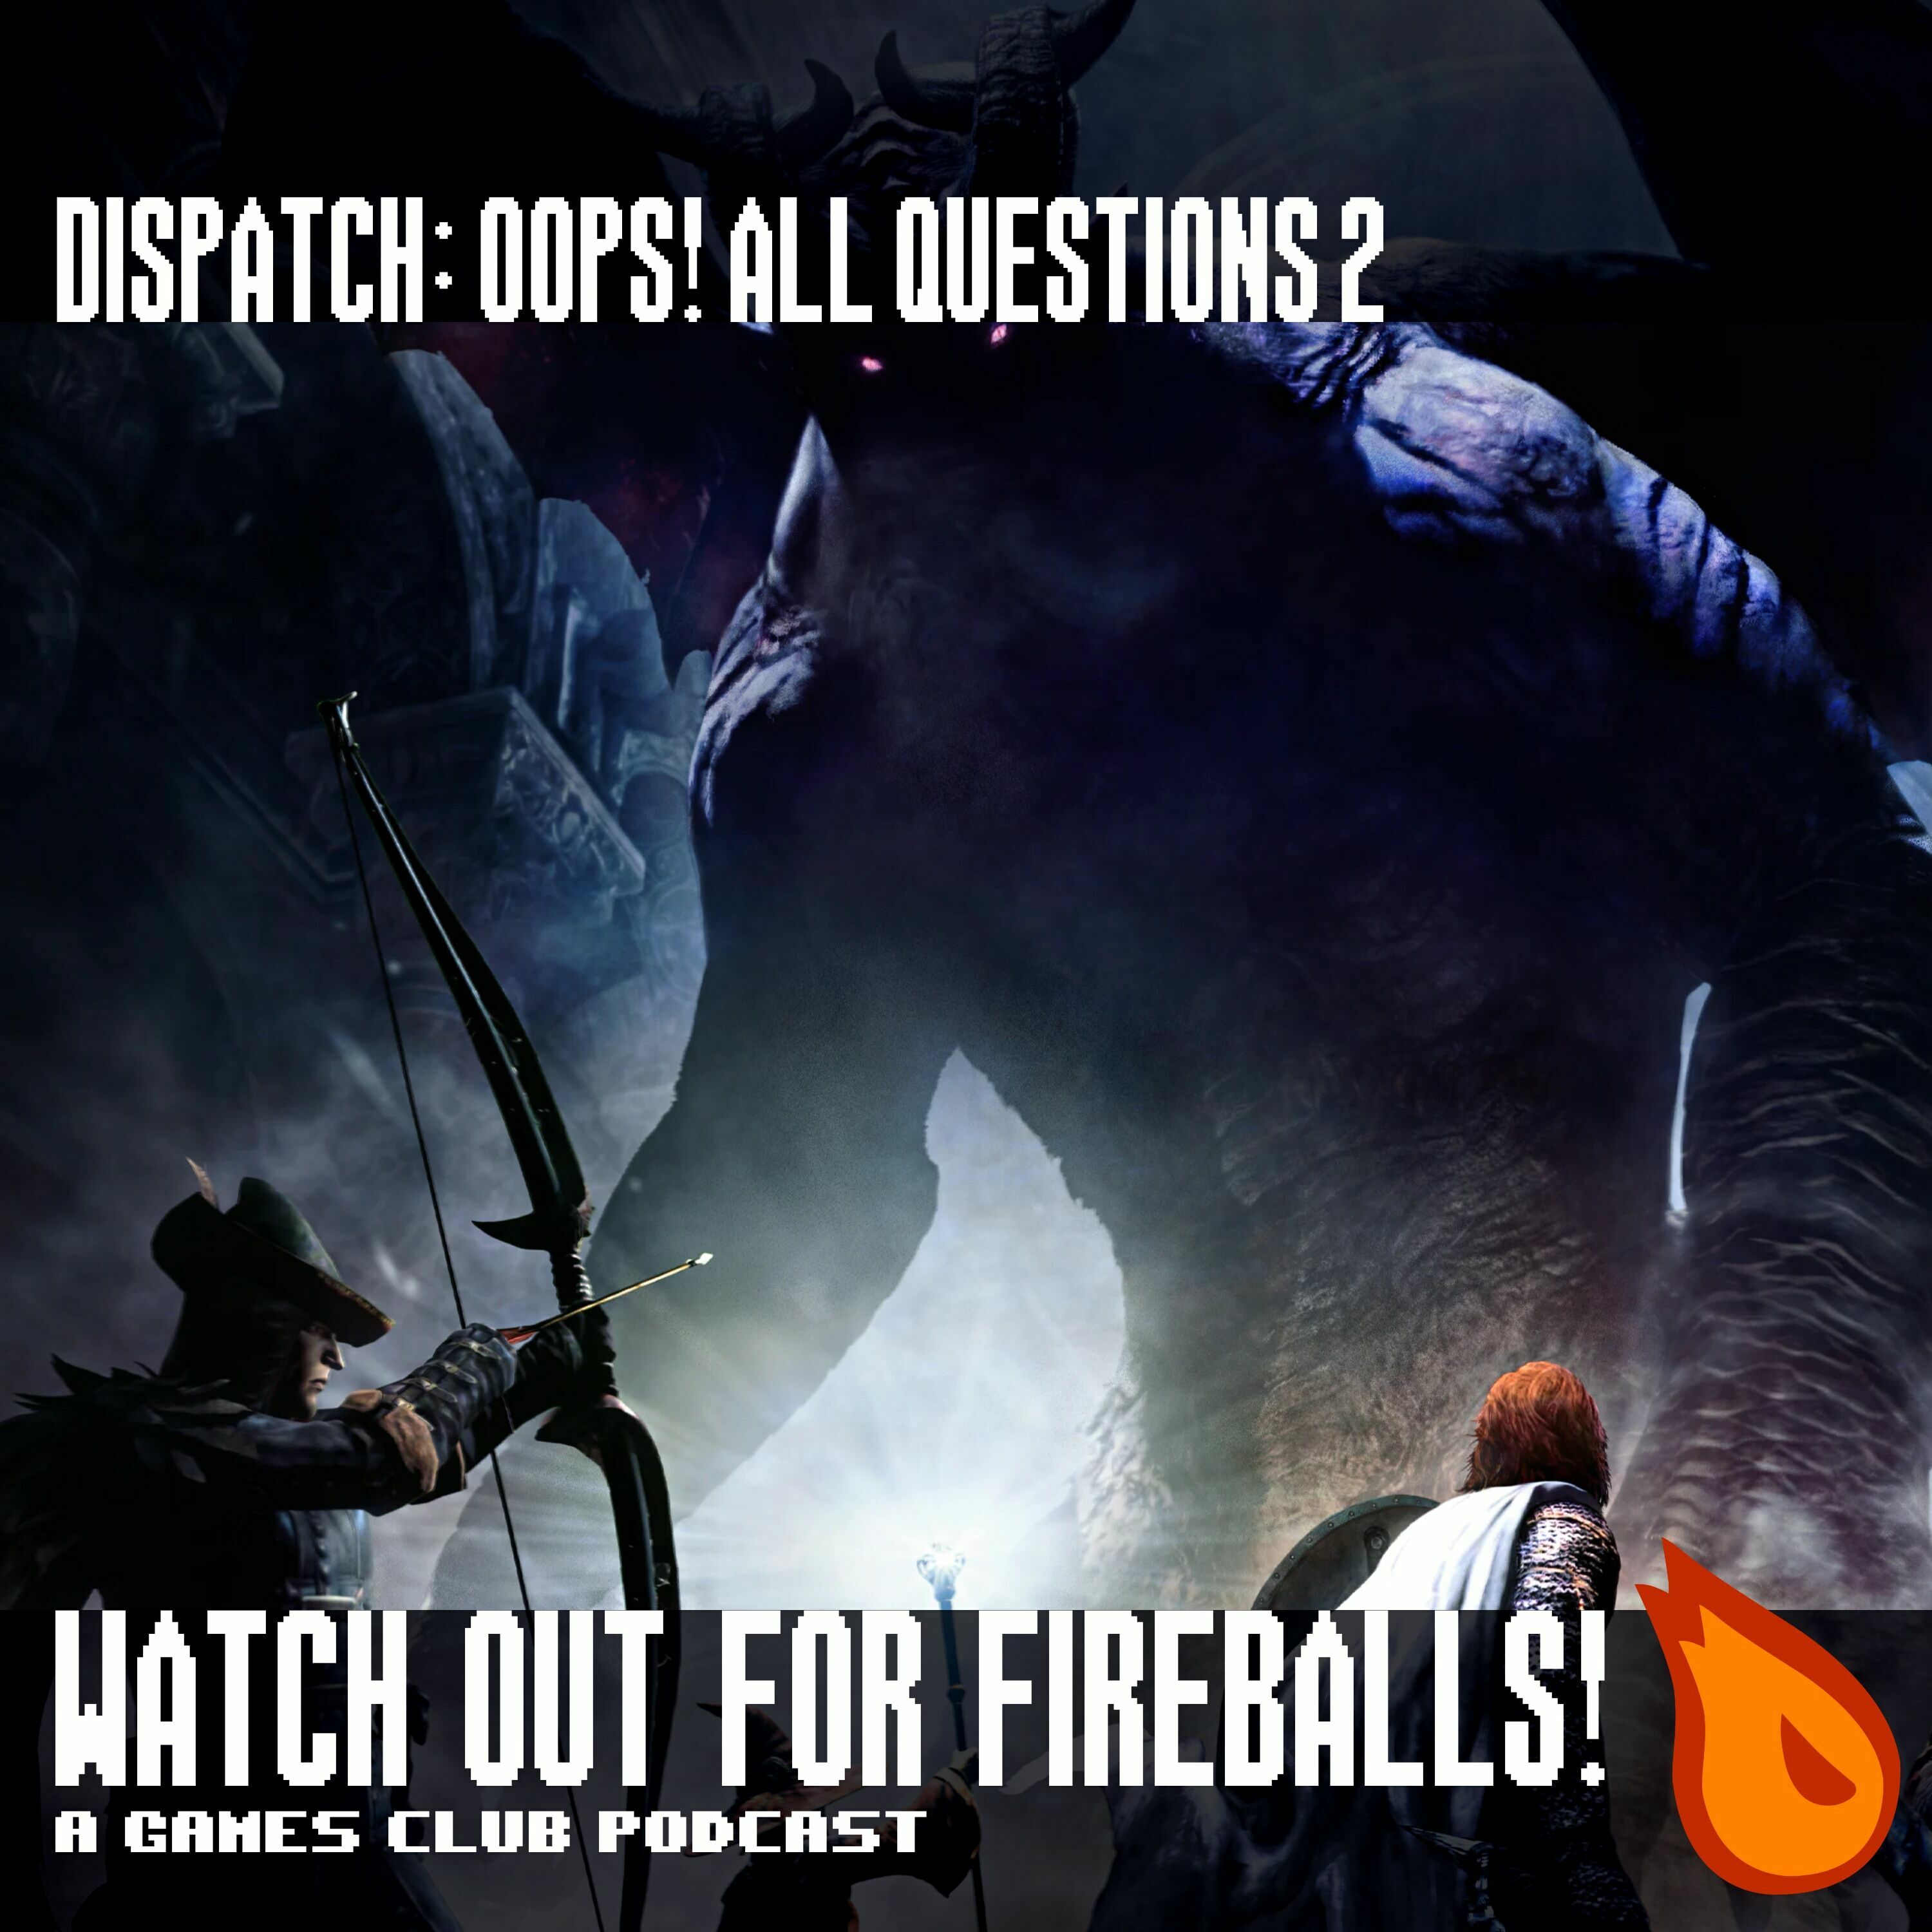 WOFF! Dispatch: Oops! All Questions 2